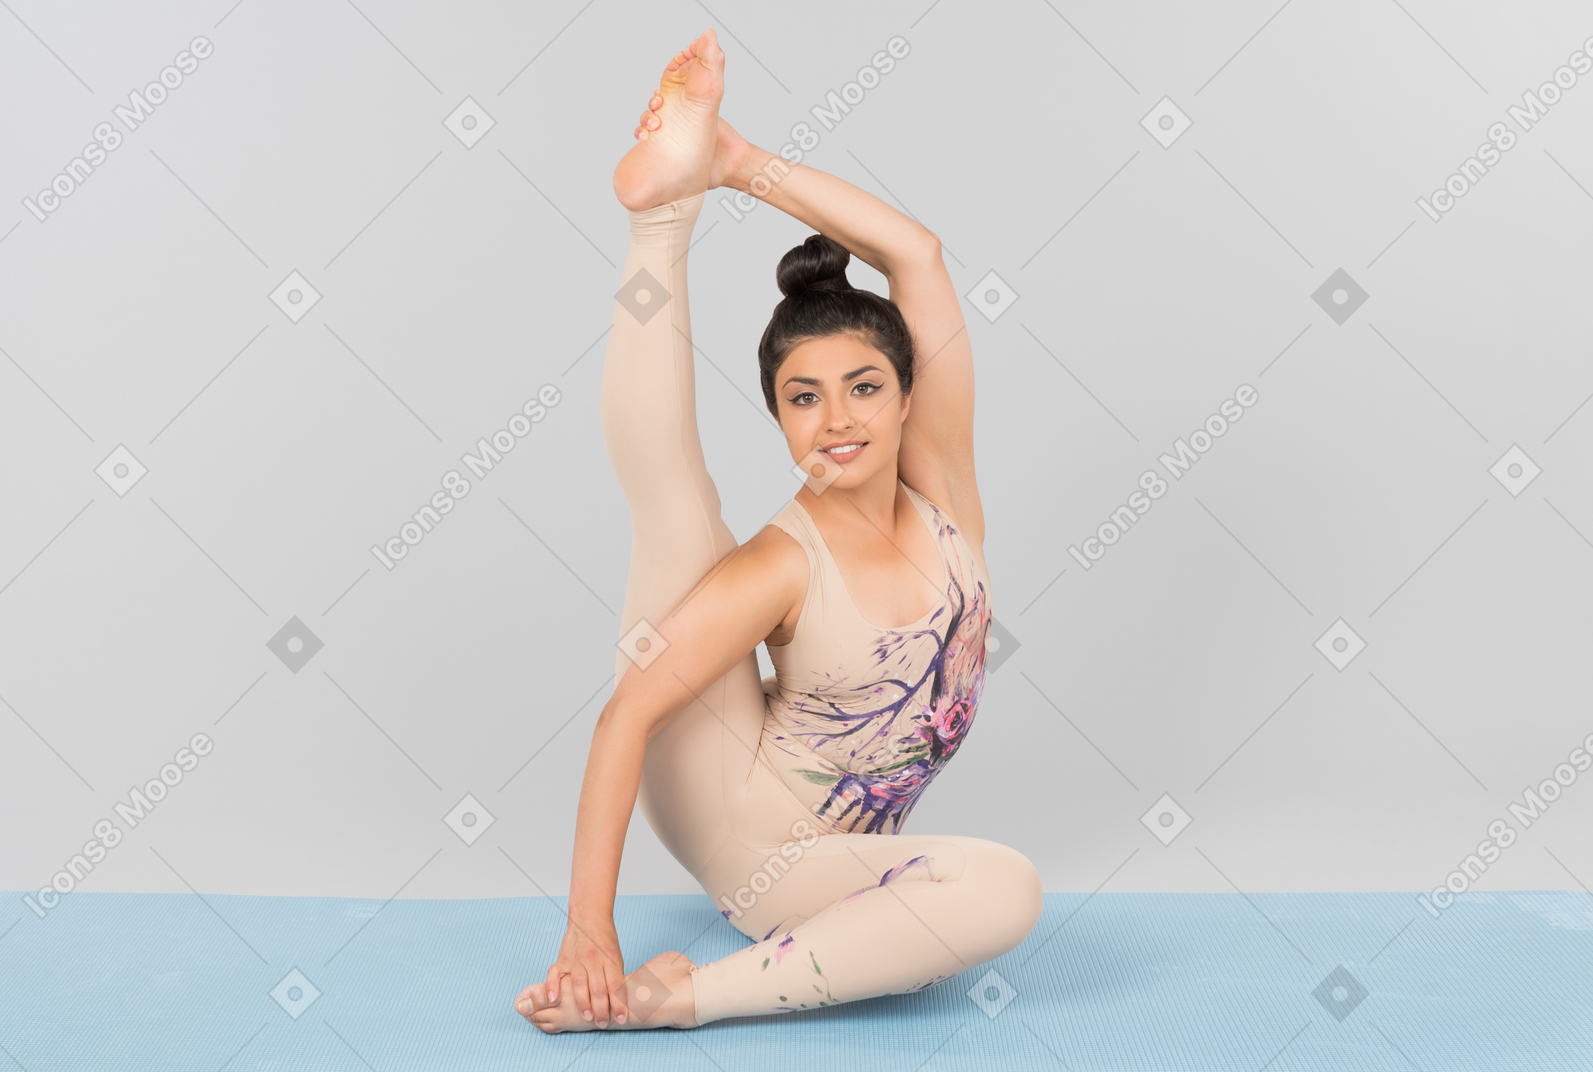 Young indian gymnast sitting on yoga mat with one leg up and touching her toe with a hand